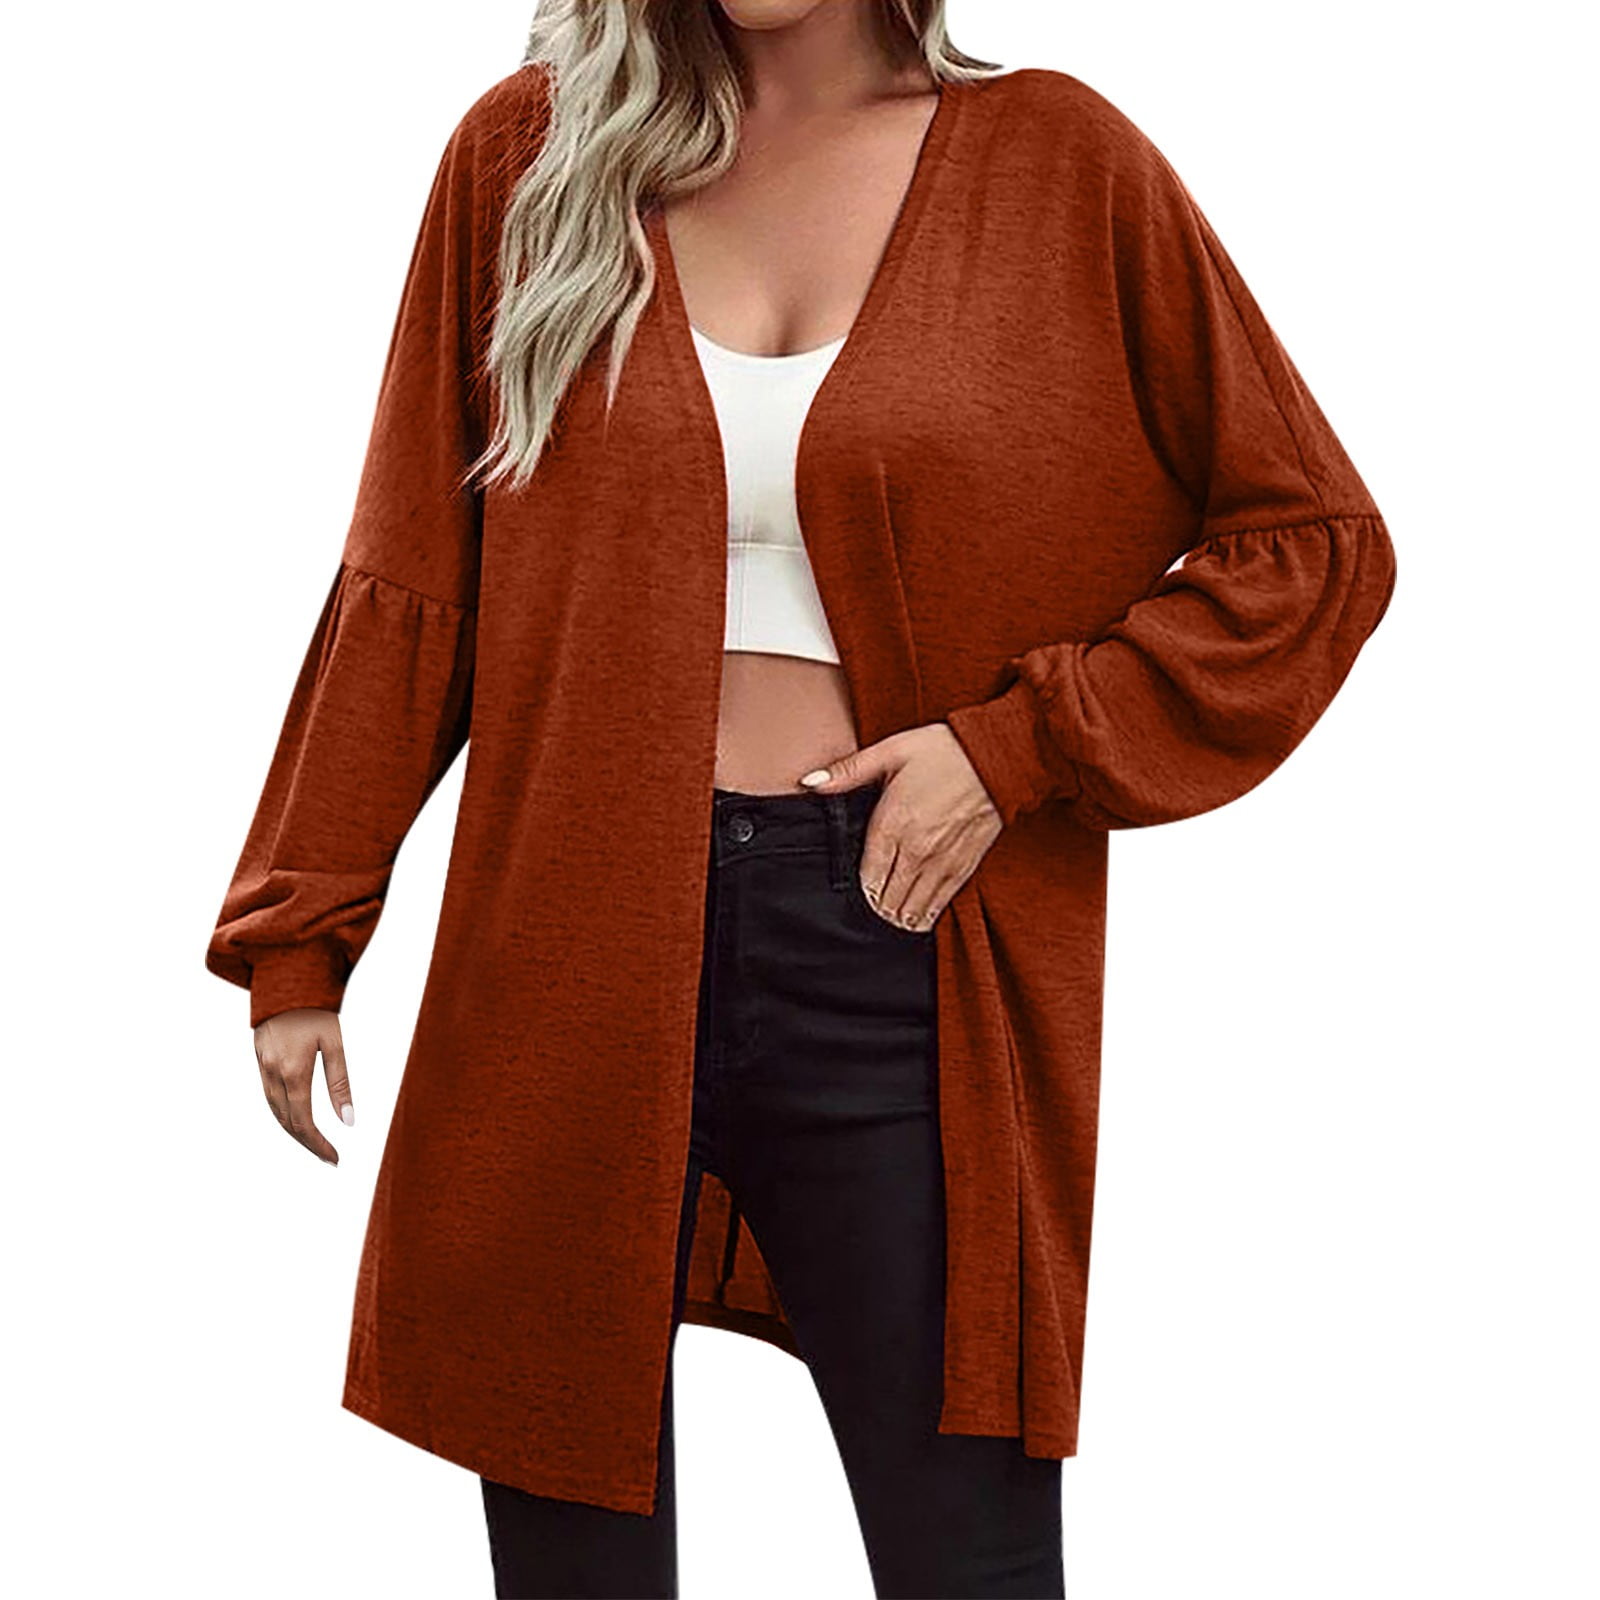 Xinqinghao Sweater Cardigan For Women Solid Color Plus Size Cardigan ...